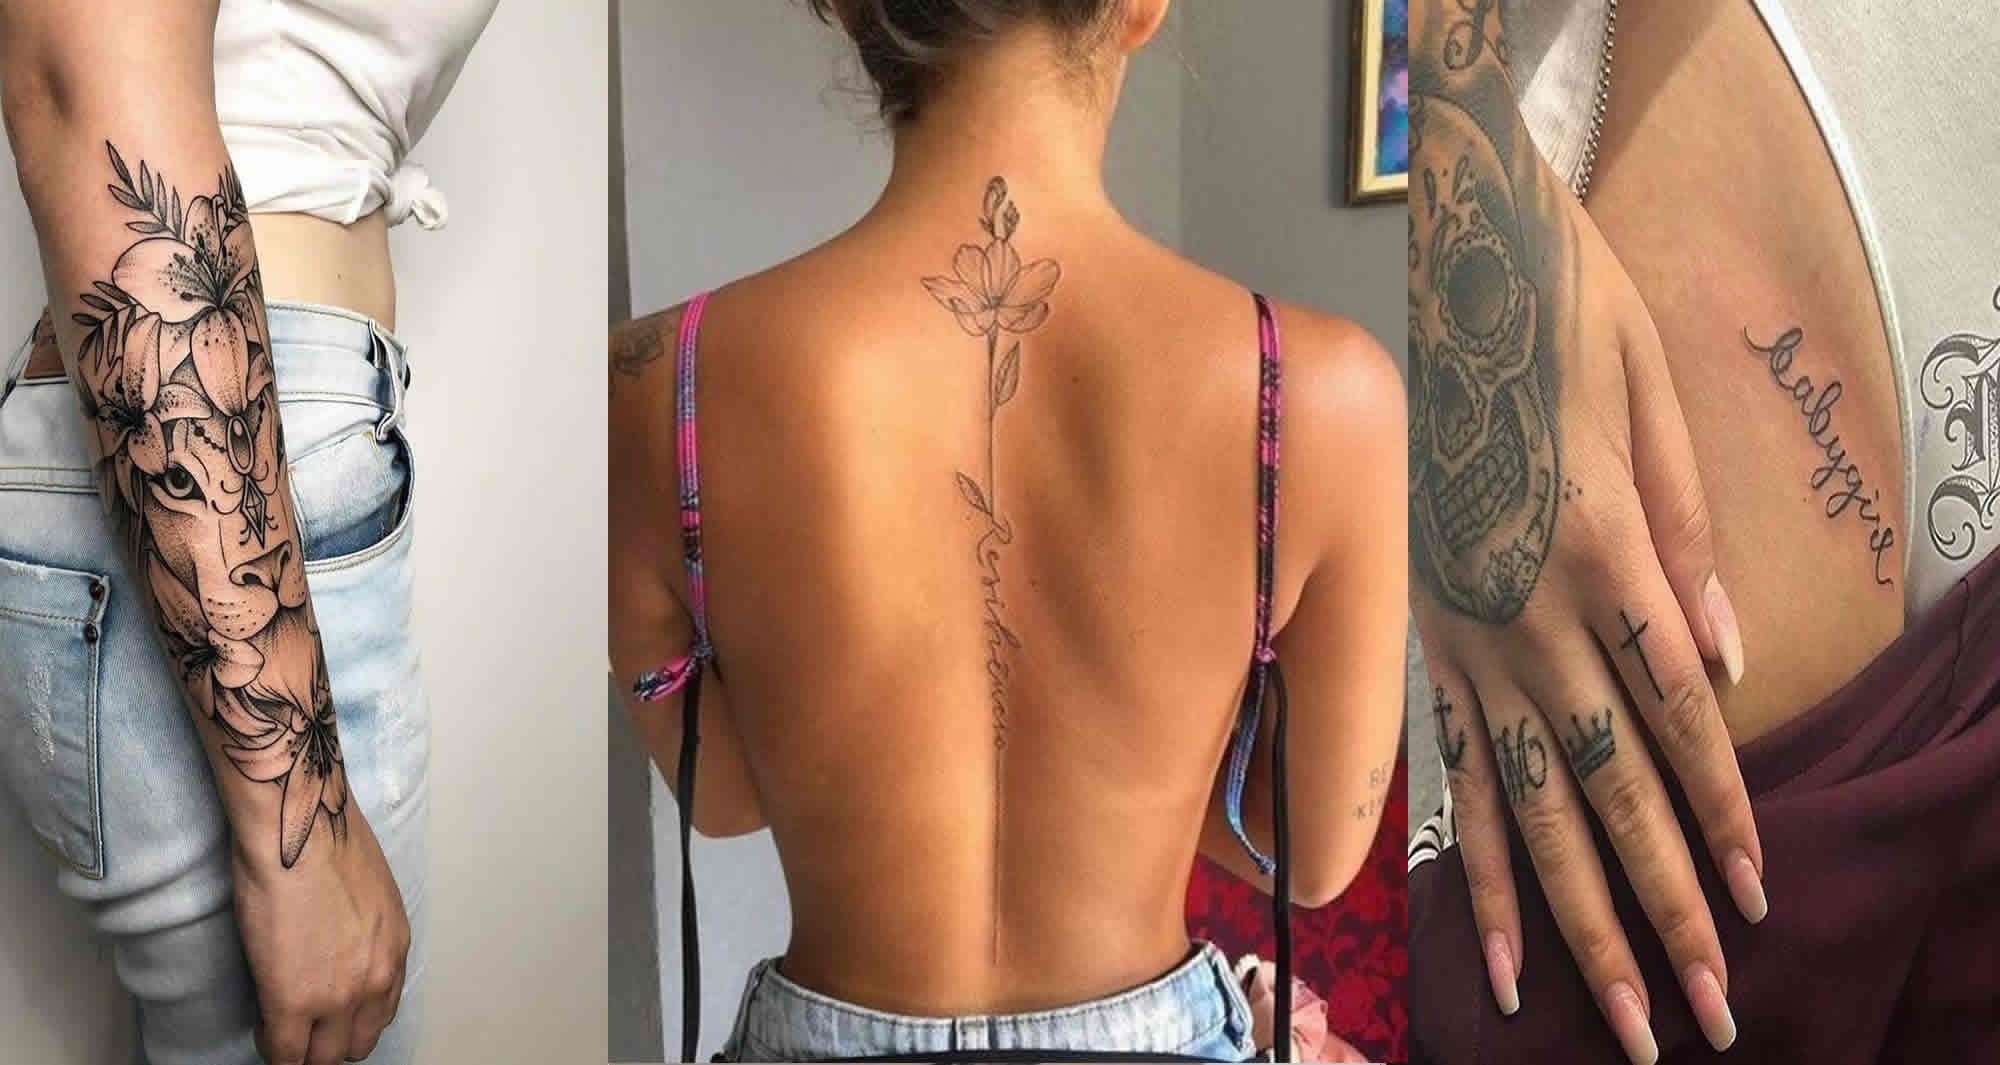 Self-Love Tattoos: 94 Ideas With Deep Meaning to Inspire and Empower |  Bored Panda